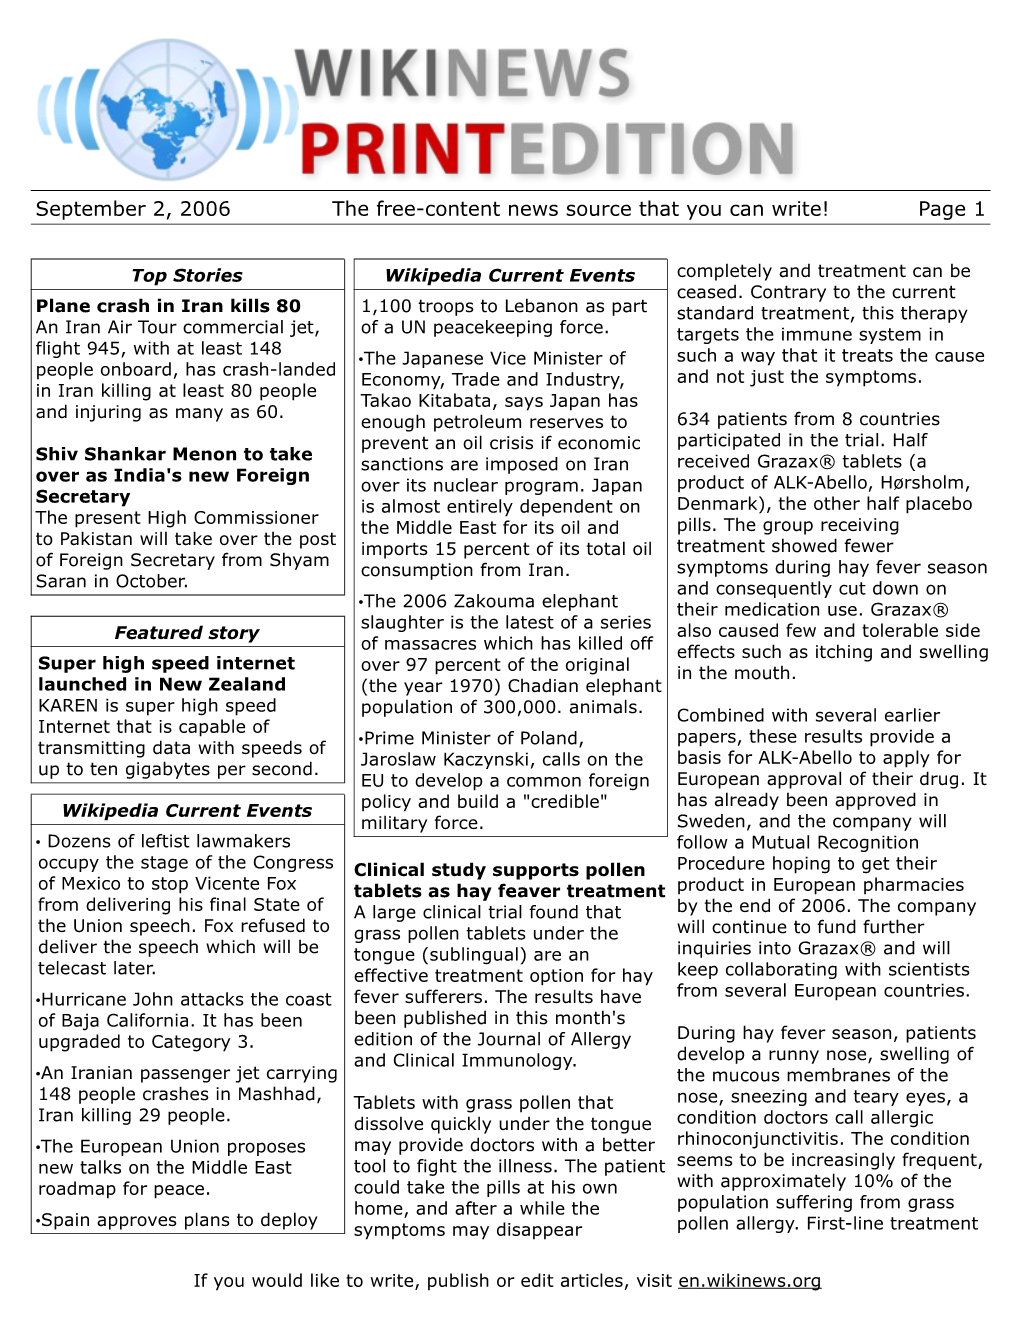 September 2, 2006 the Free-Content News Source That You Can Write! Page 1